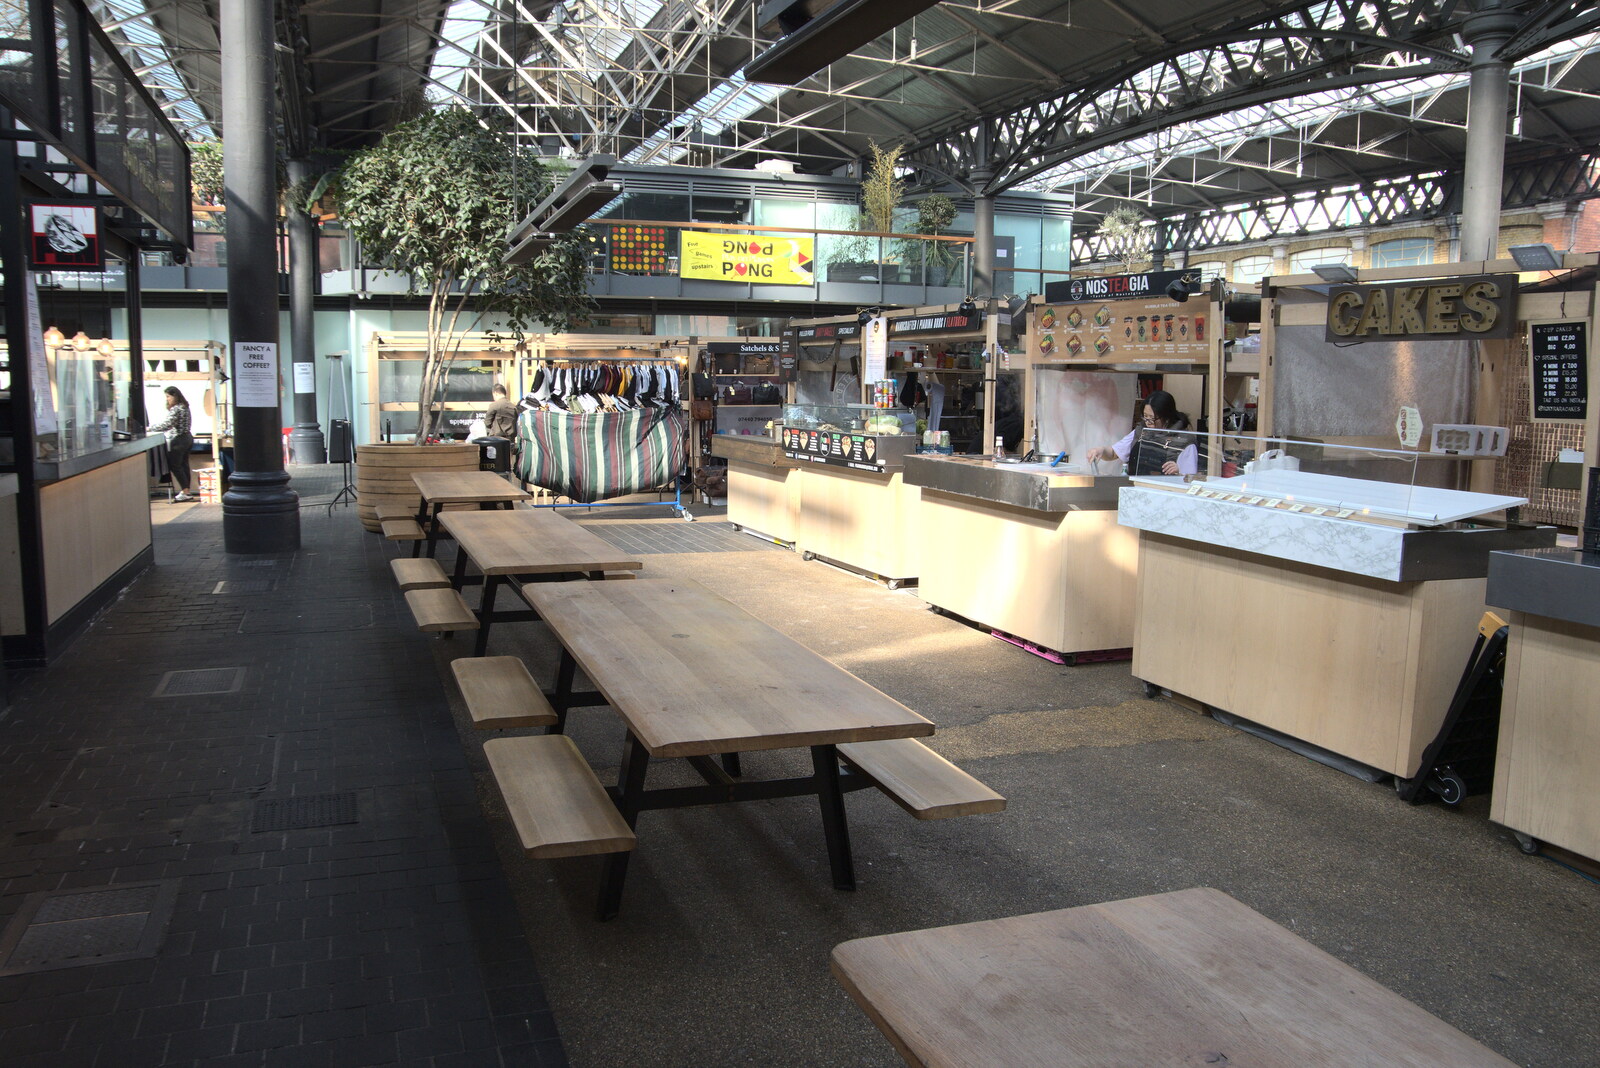 A Walk Around the South Bank, London - 25th March 2022: New Spitalfields Market is quiet